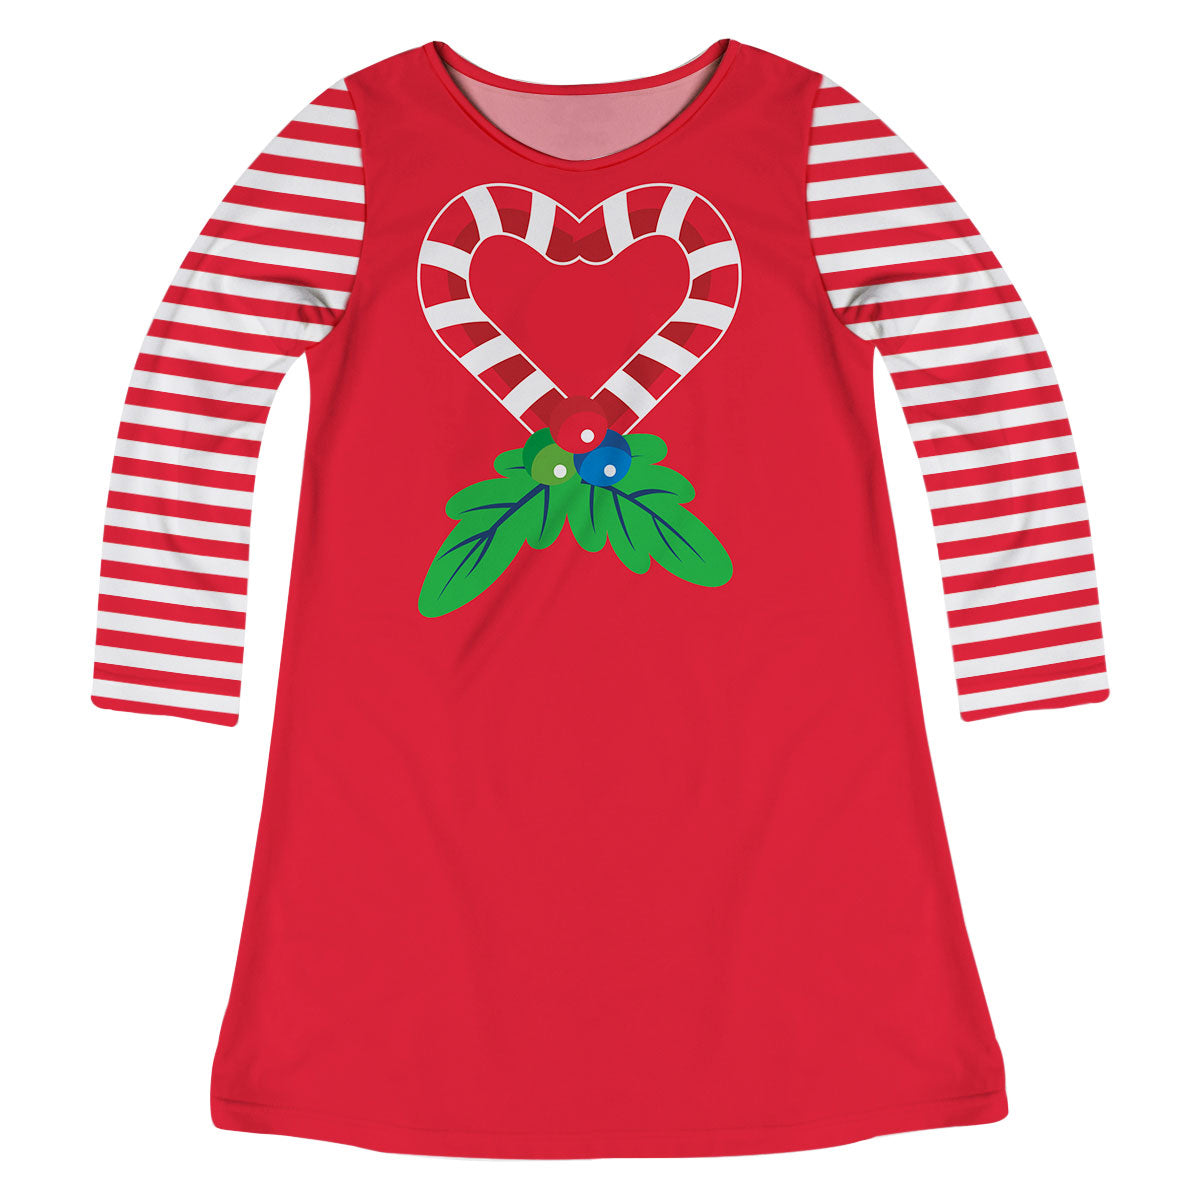 Girls red and green candy canes dress with monogram - Wimziy&Co.